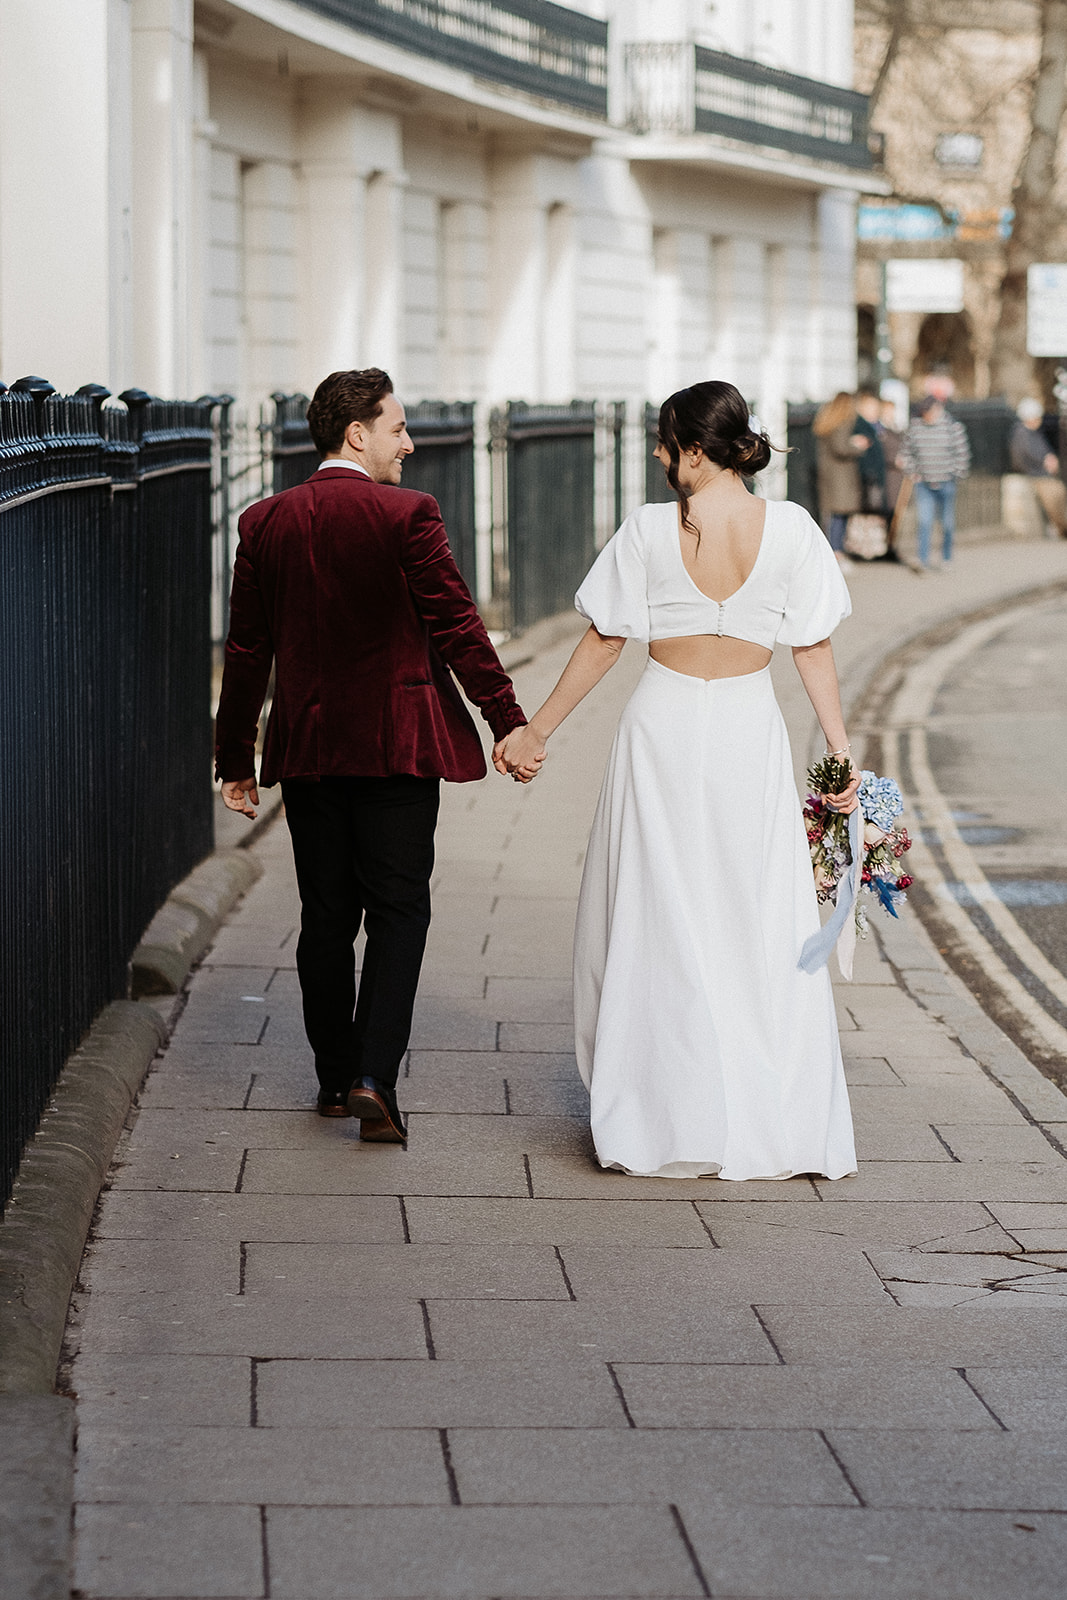 St Leanords Place, York - perfect for wedding portraits and elopement photography 